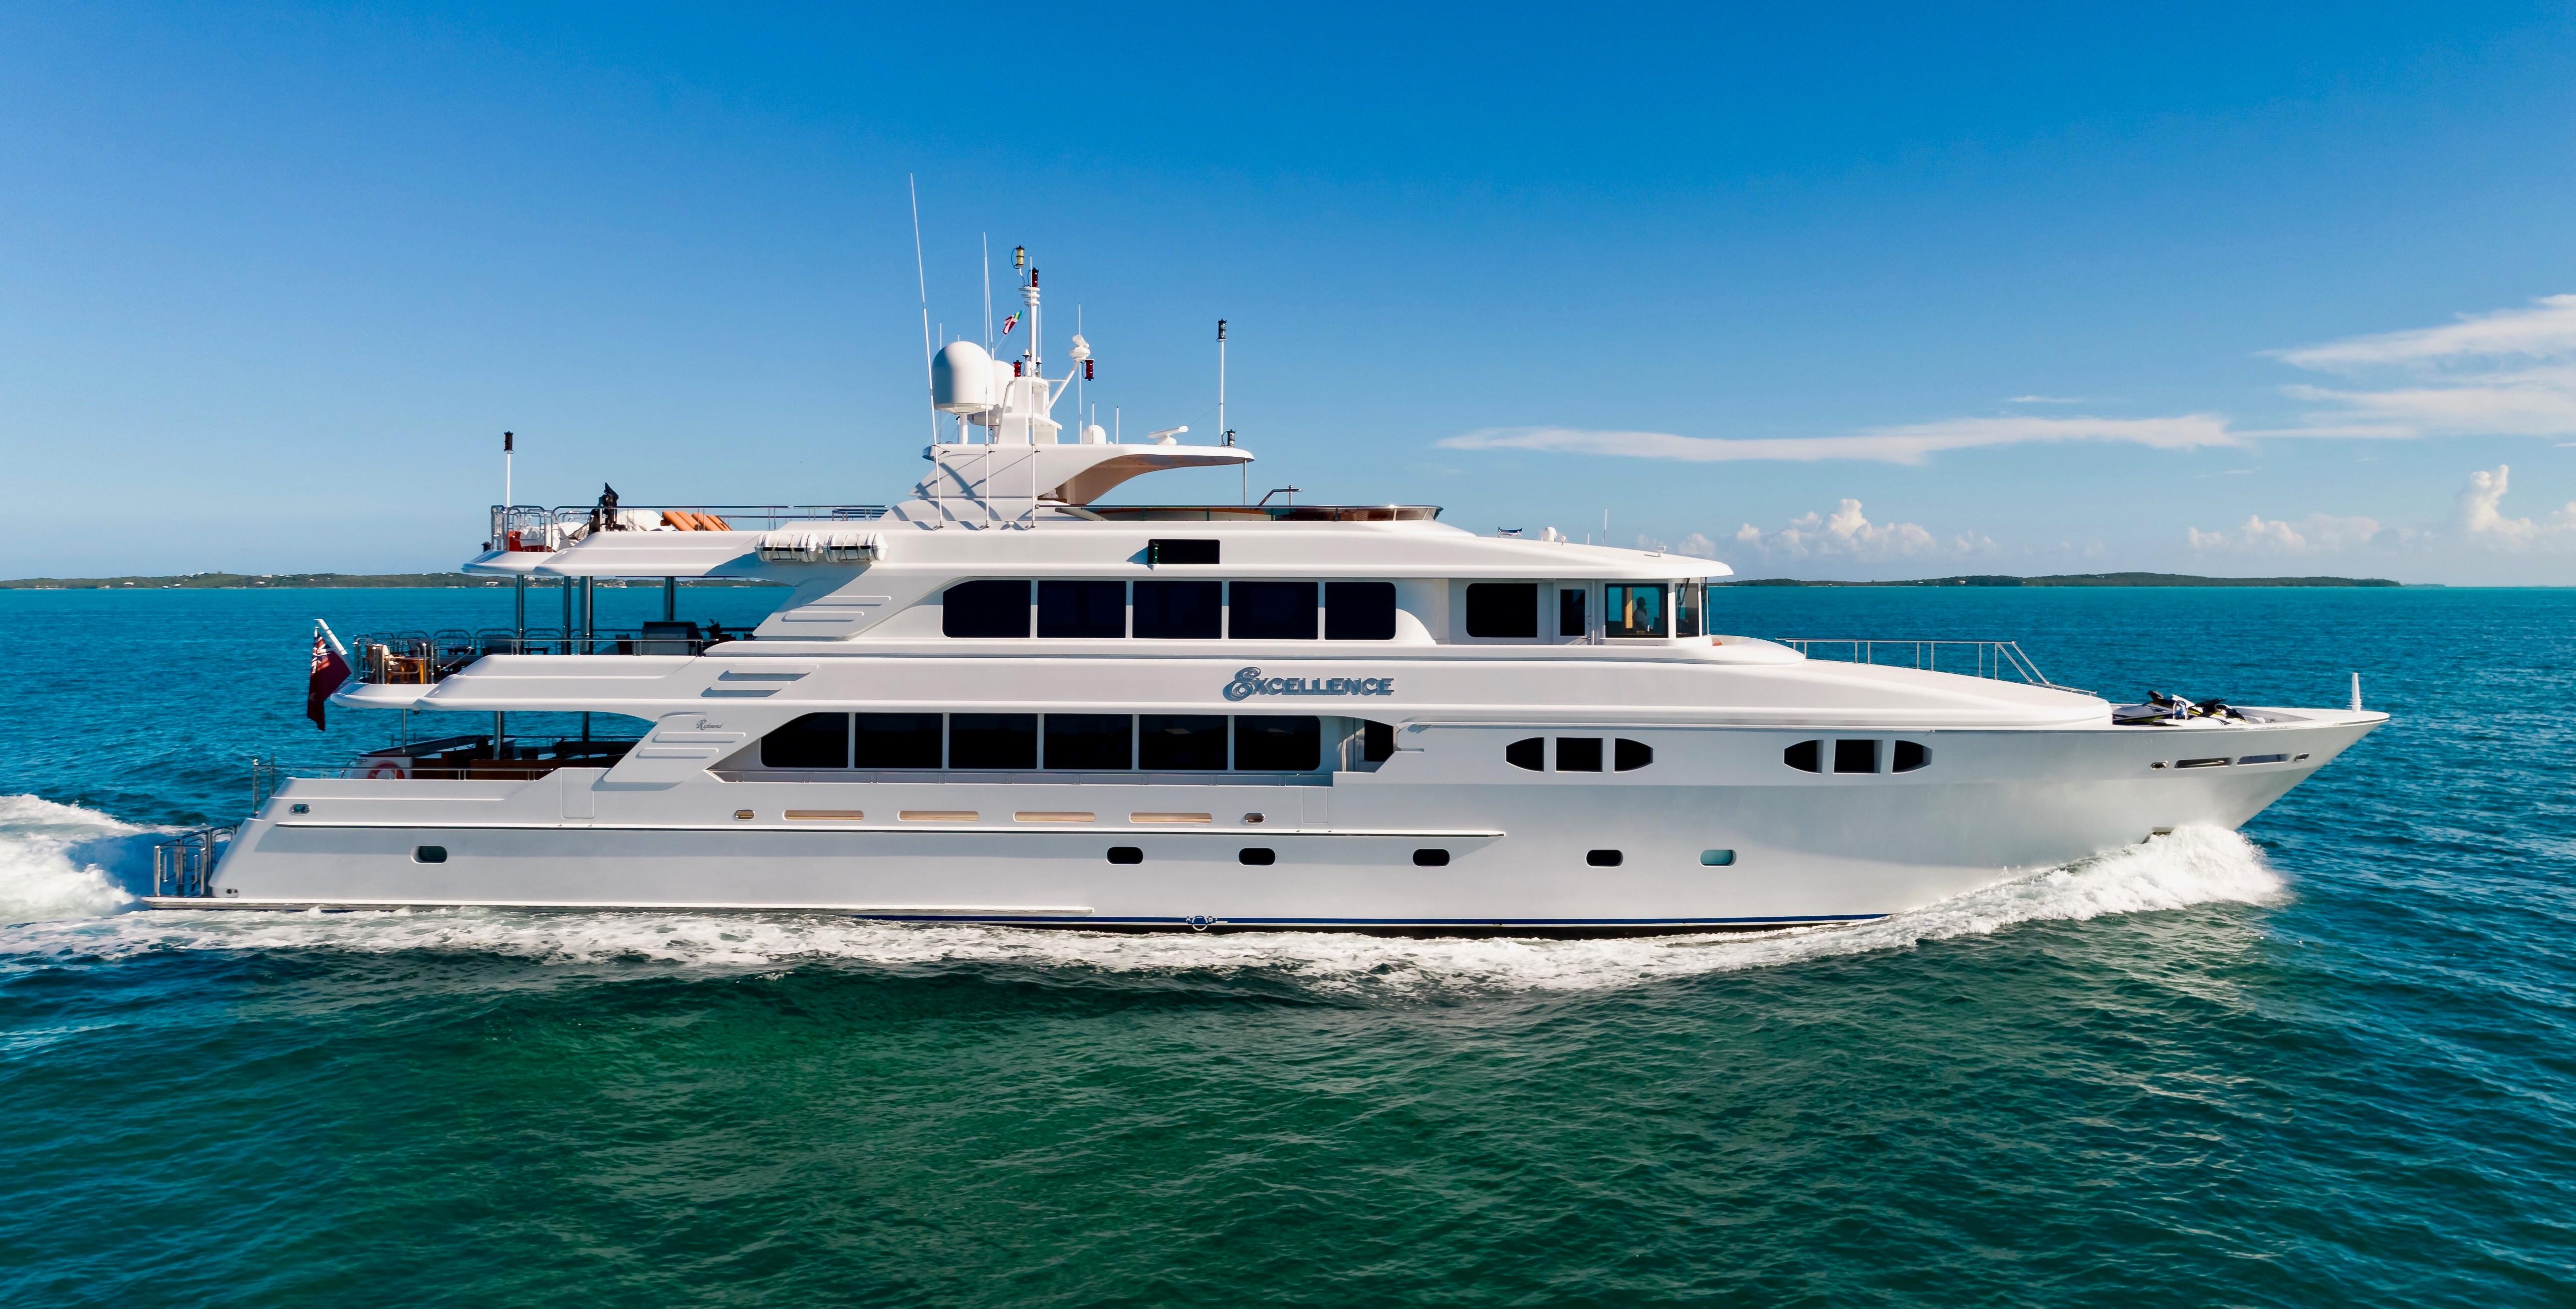 excellence: one of the most compact yachts with a helipad